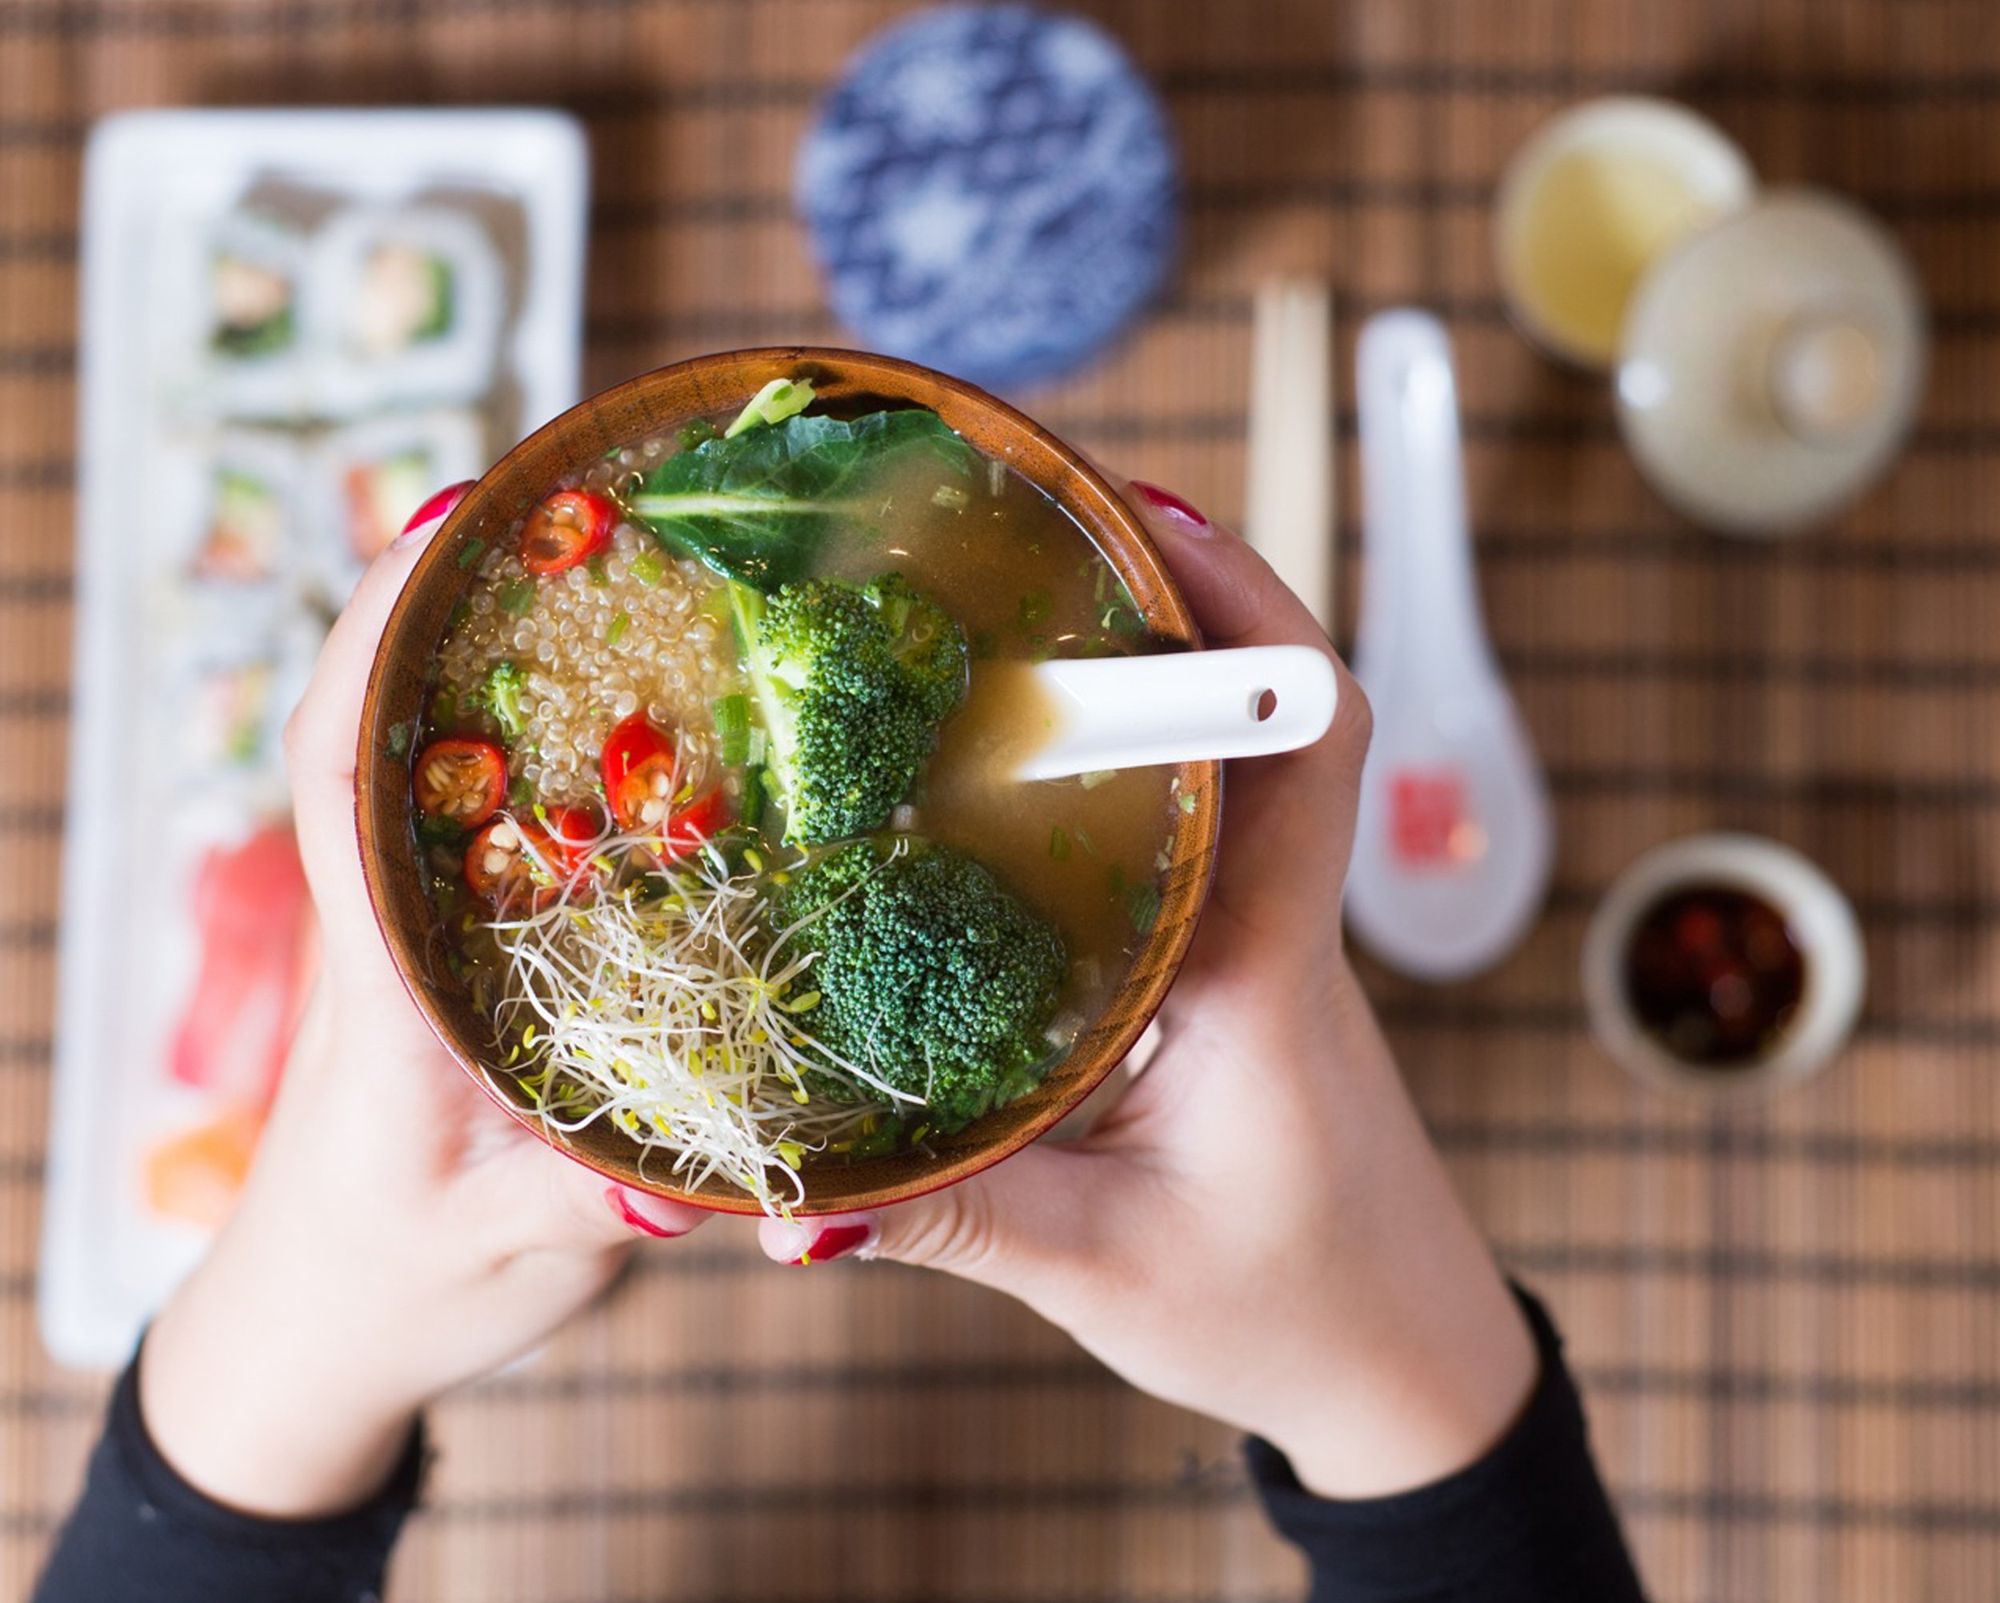 Miso soup, how it is made and its Nutrition. As well as is Miso Soup Gluten free?